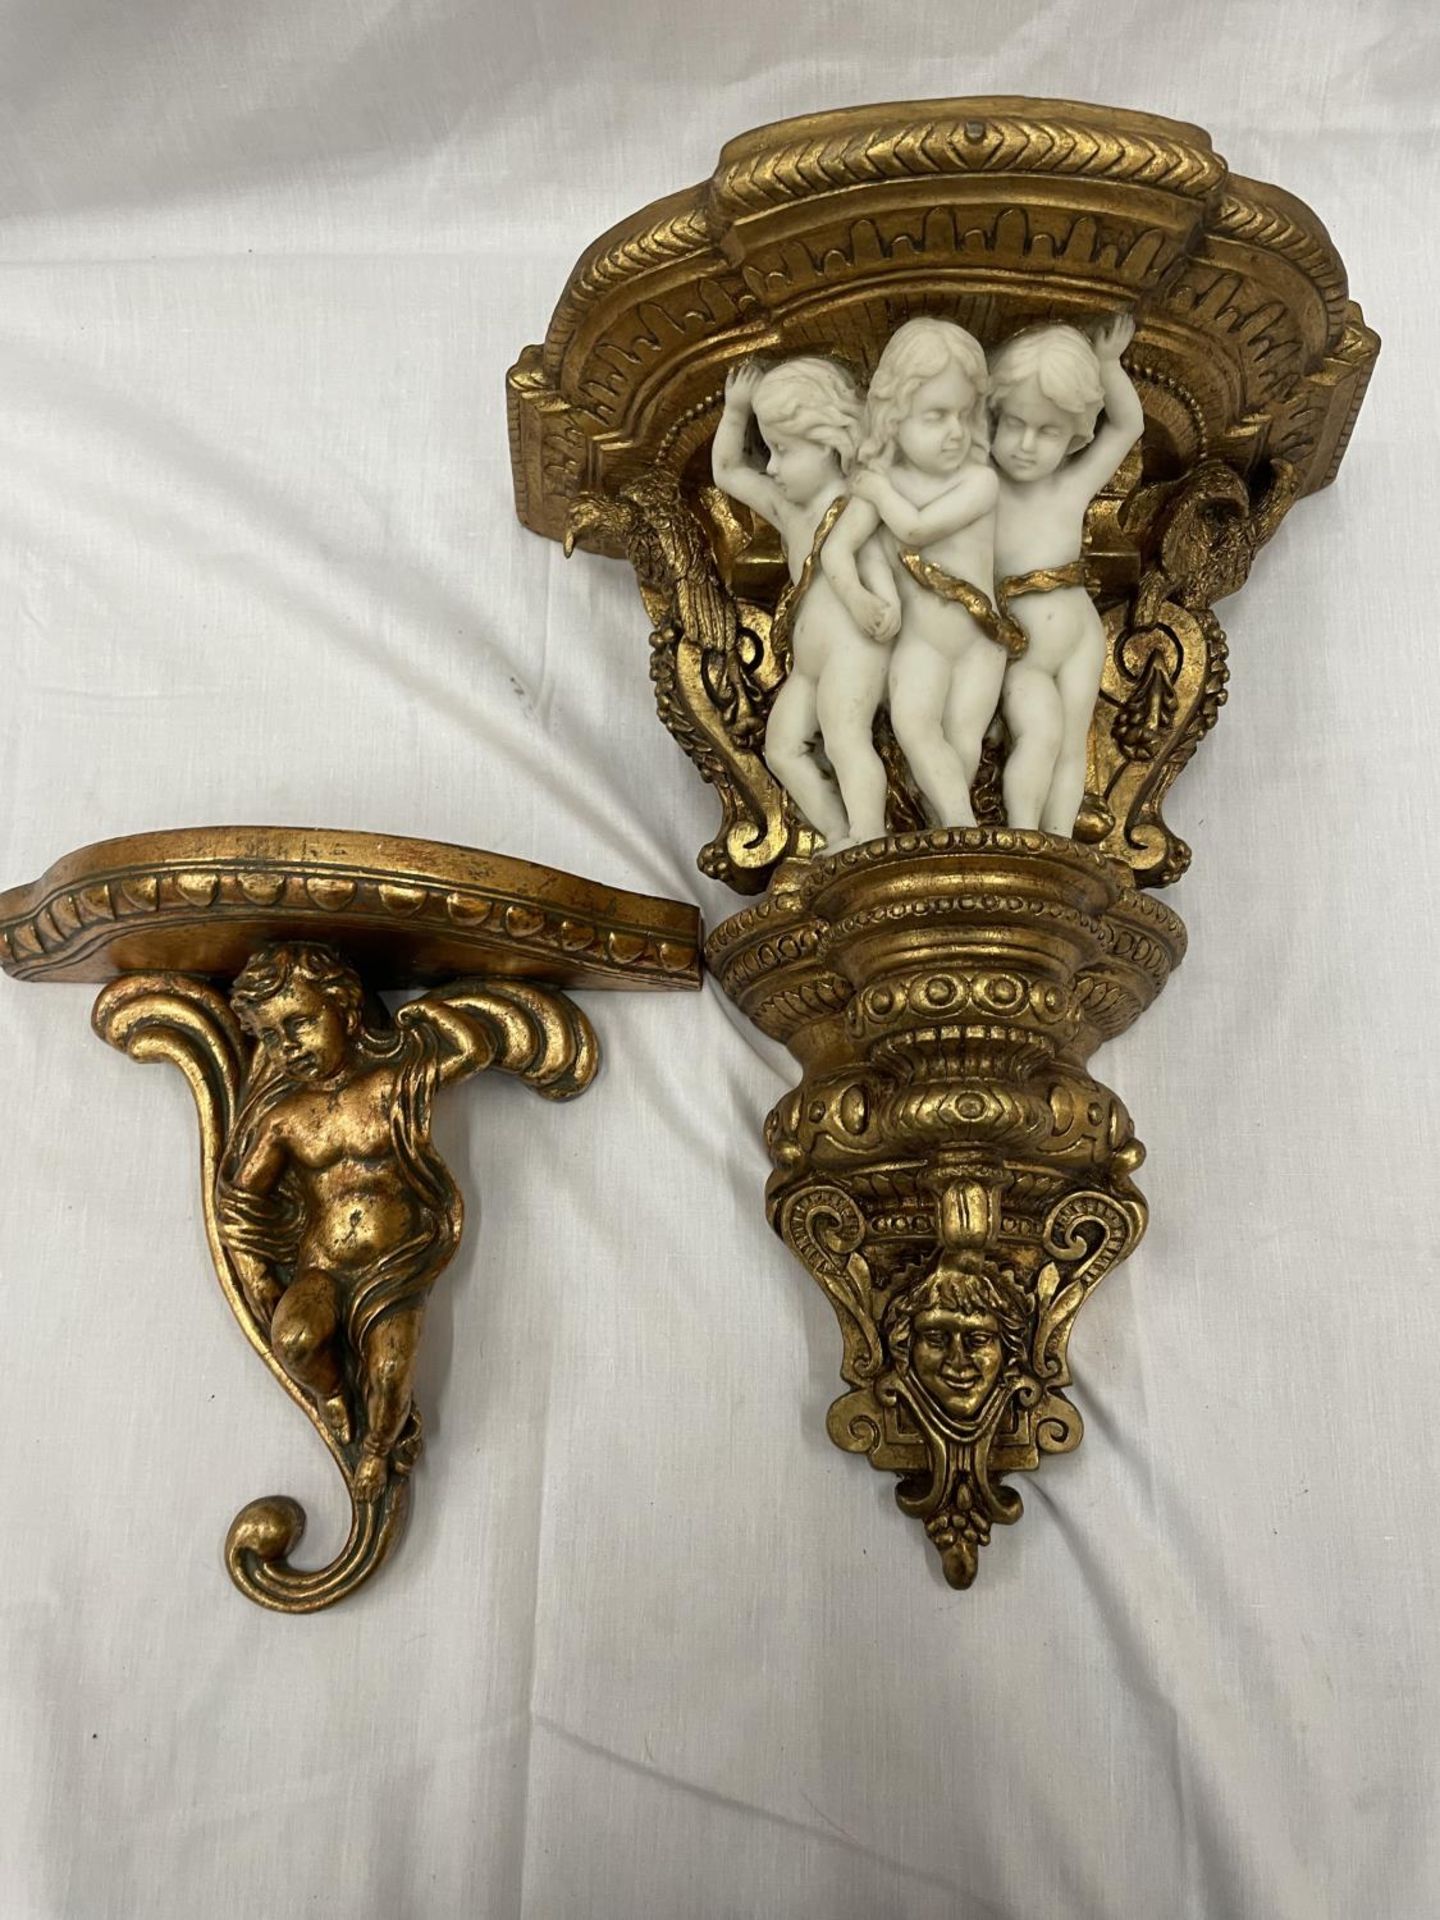 A LARGE GILDED WALL SCONCE WITH ELABORATE DECORATION AND CHERUBS HEIGHT 45CM, WIDTH 31CM, A GILDED